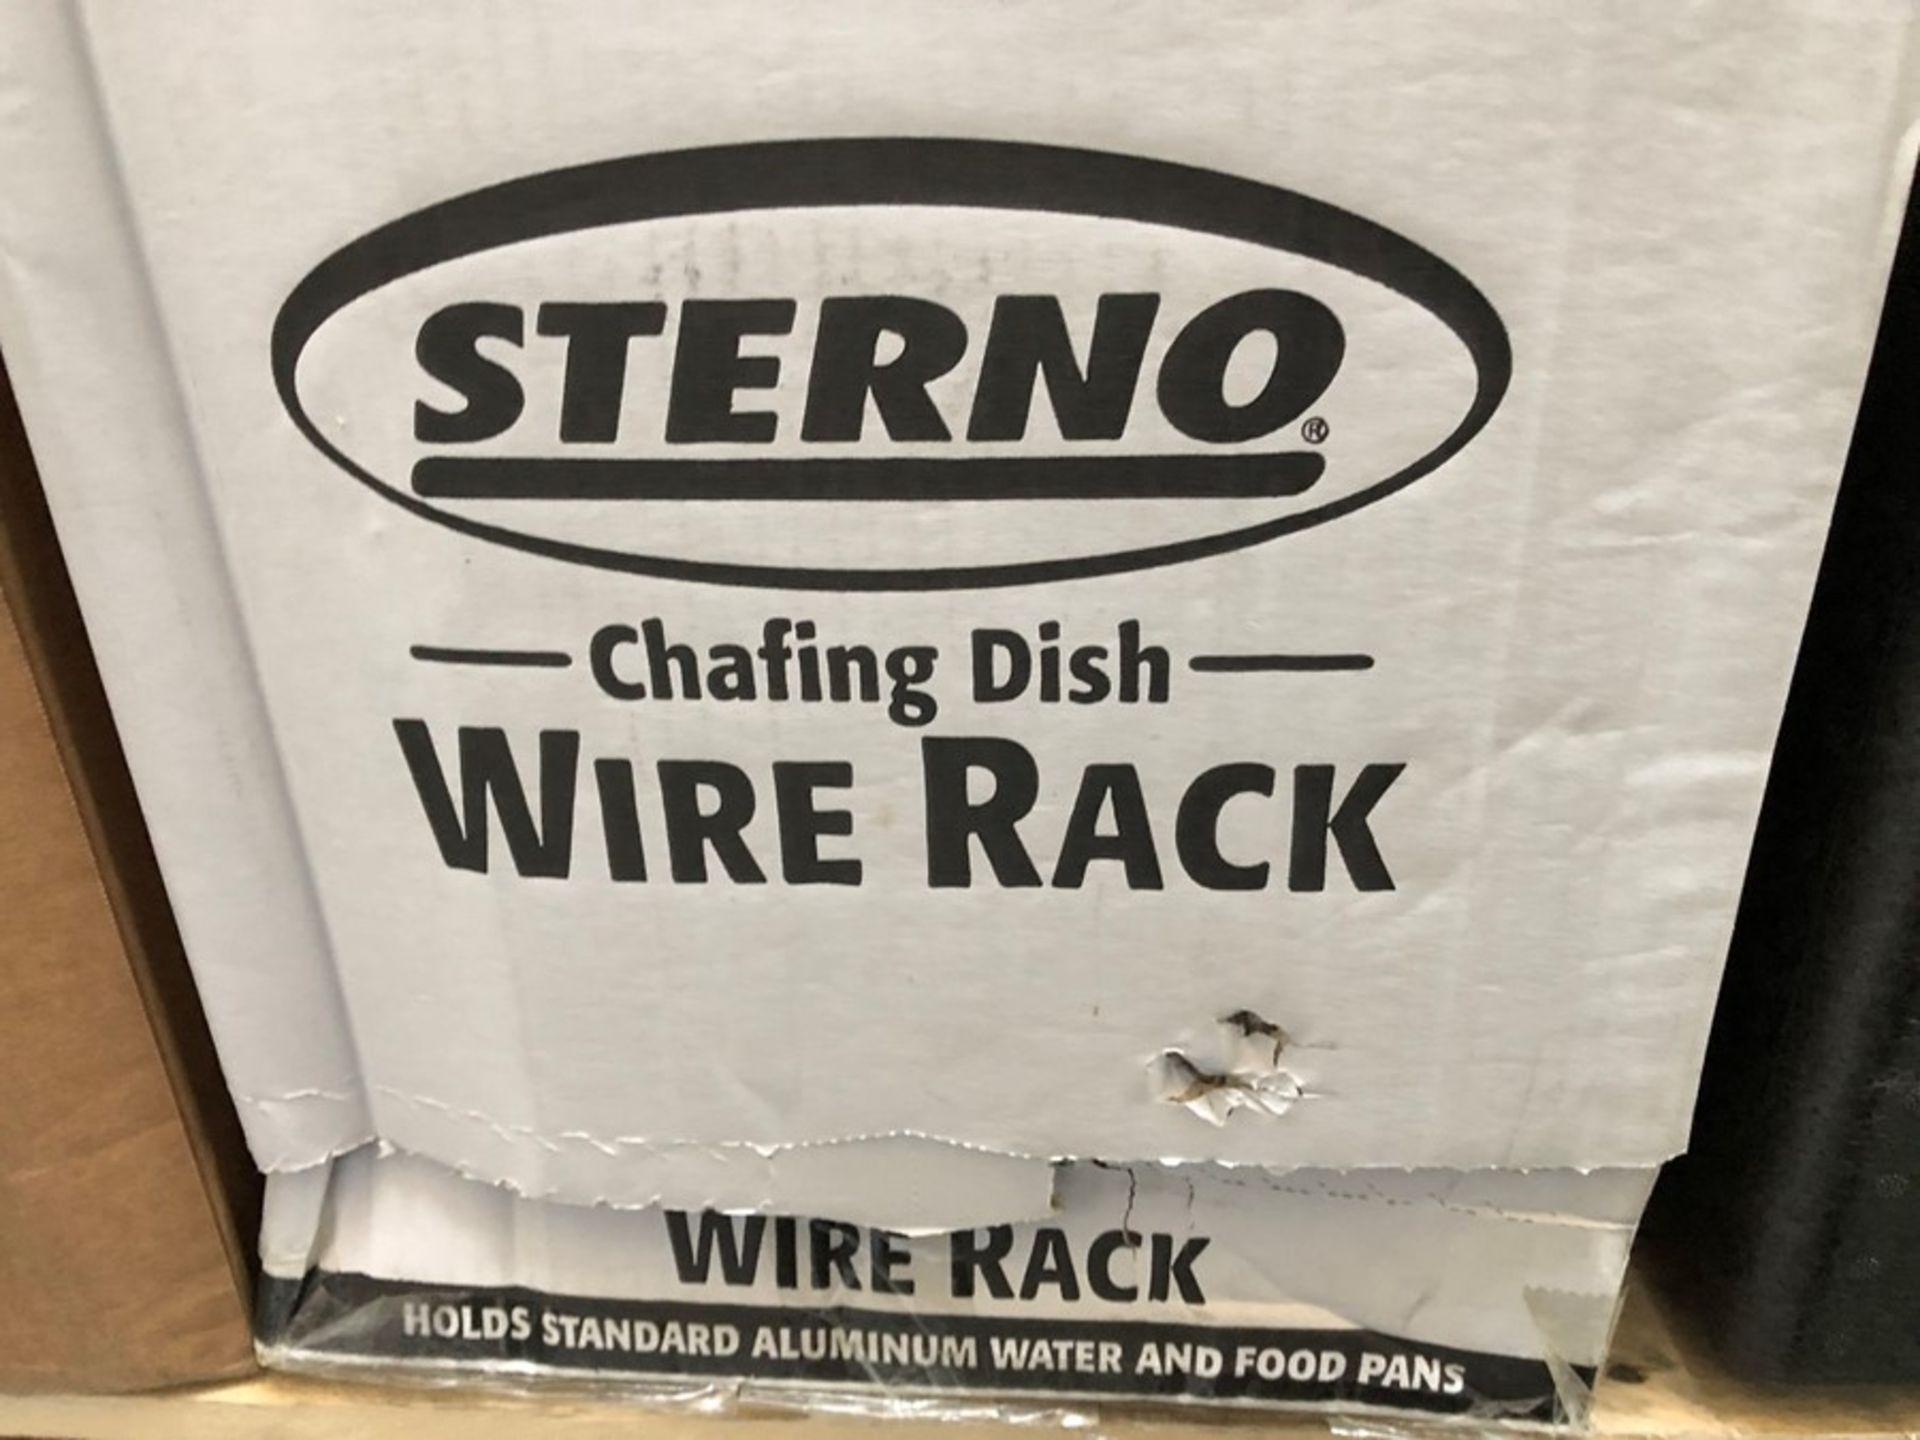 1 BOXED SET OF 18 STERNO CHAFING DISH WIRE RACKS (SOLD AS SEEN)